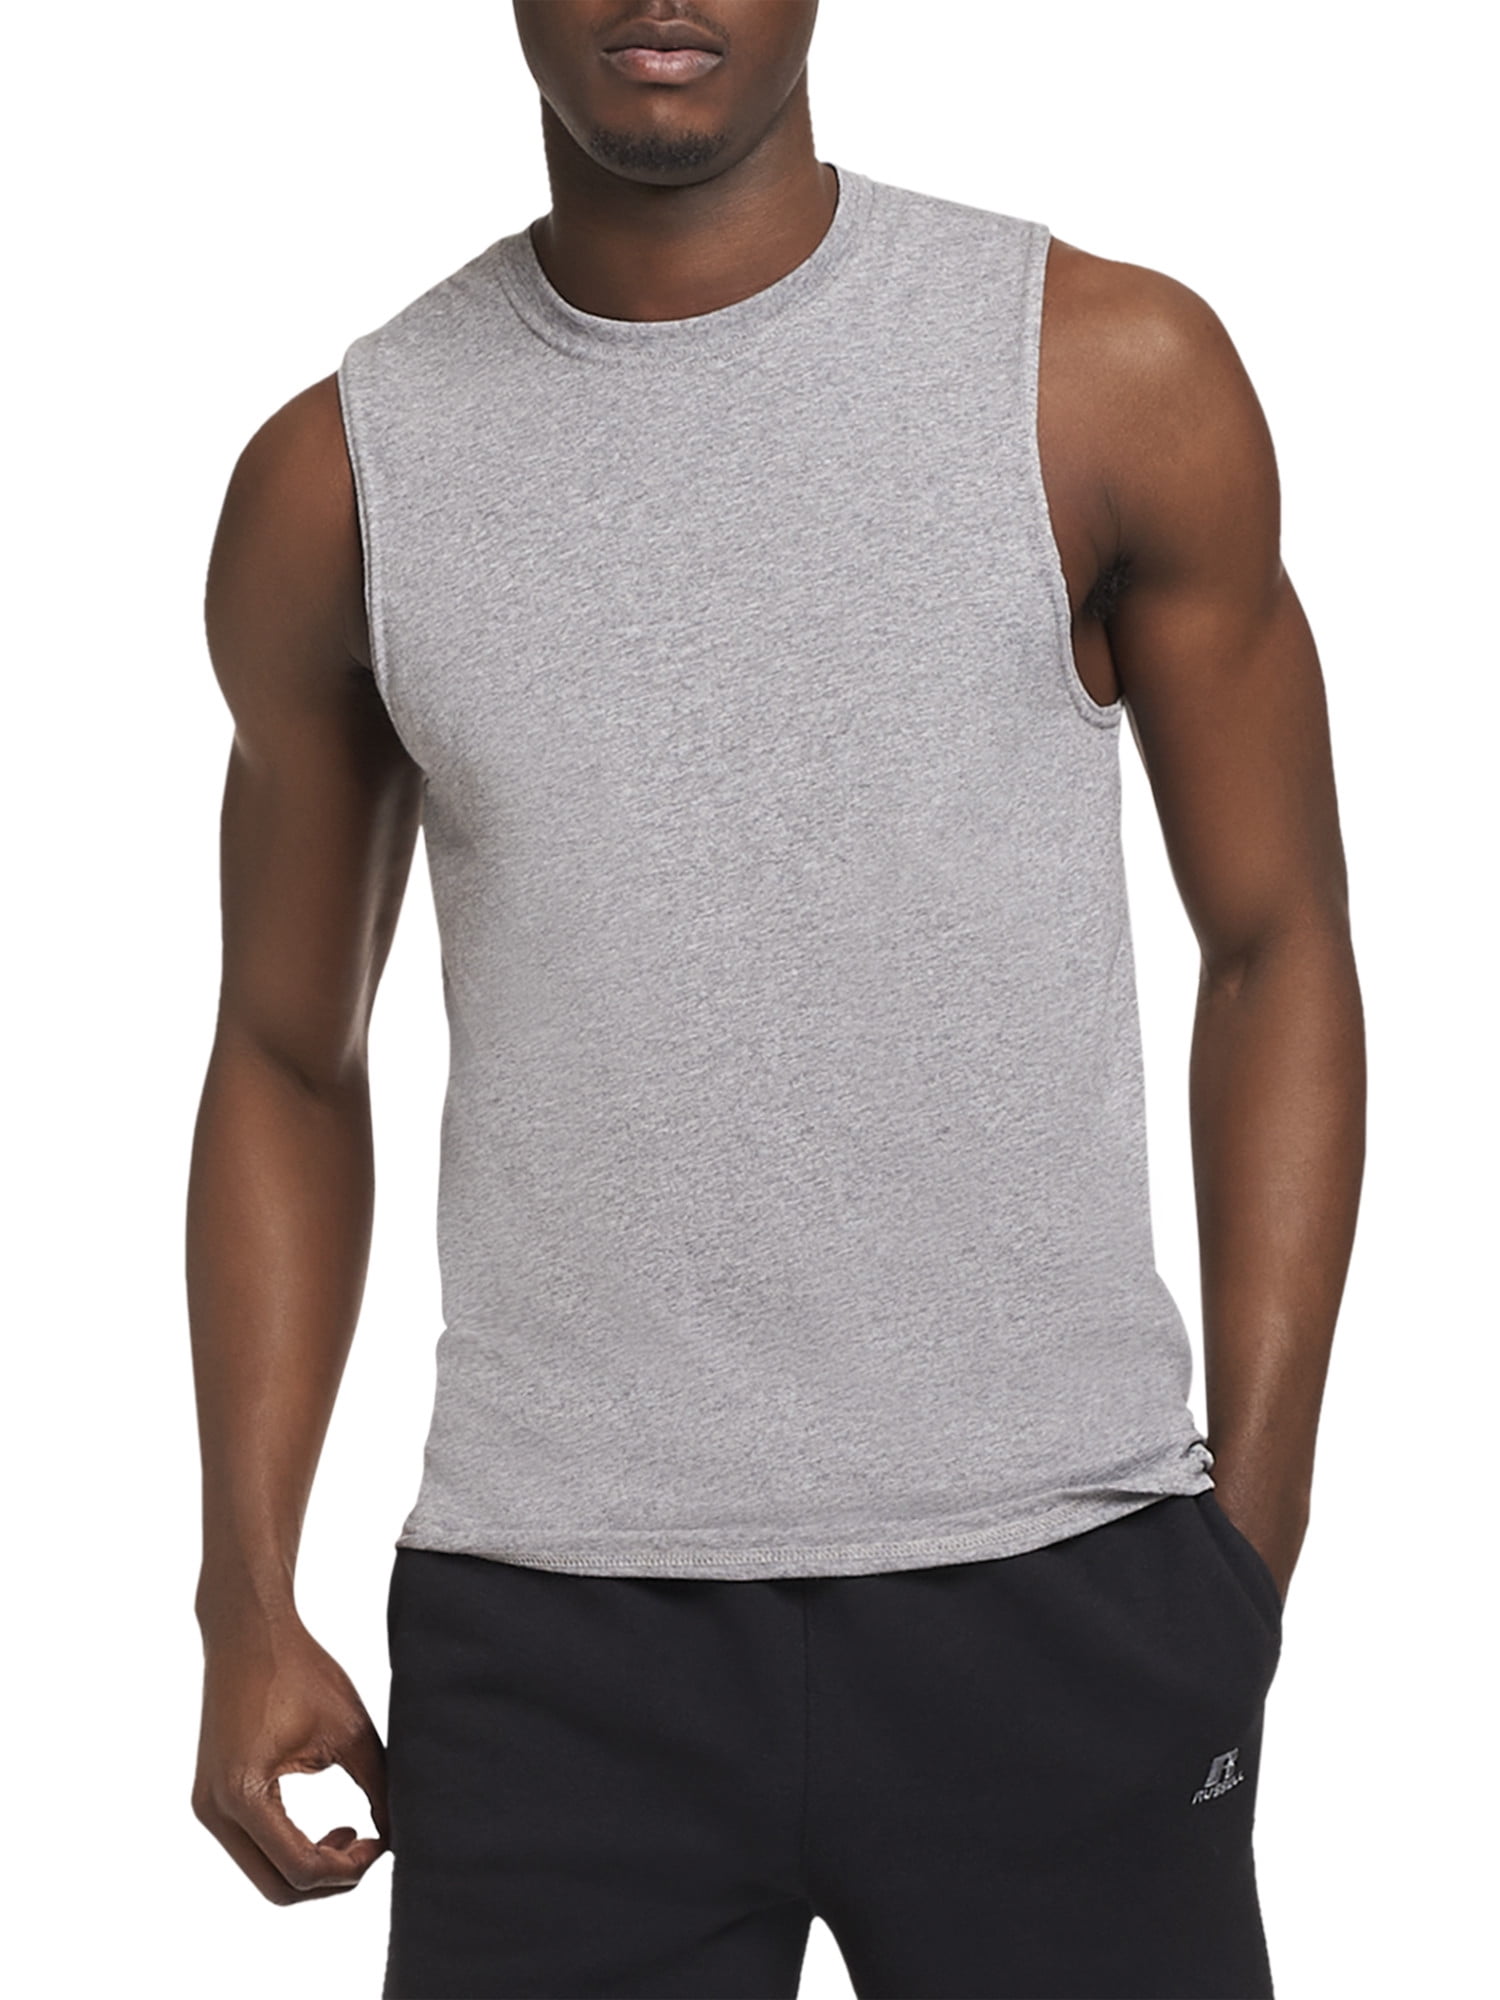 Russell - Russell Athletic Men's and Big Men's Cotton Performance ...